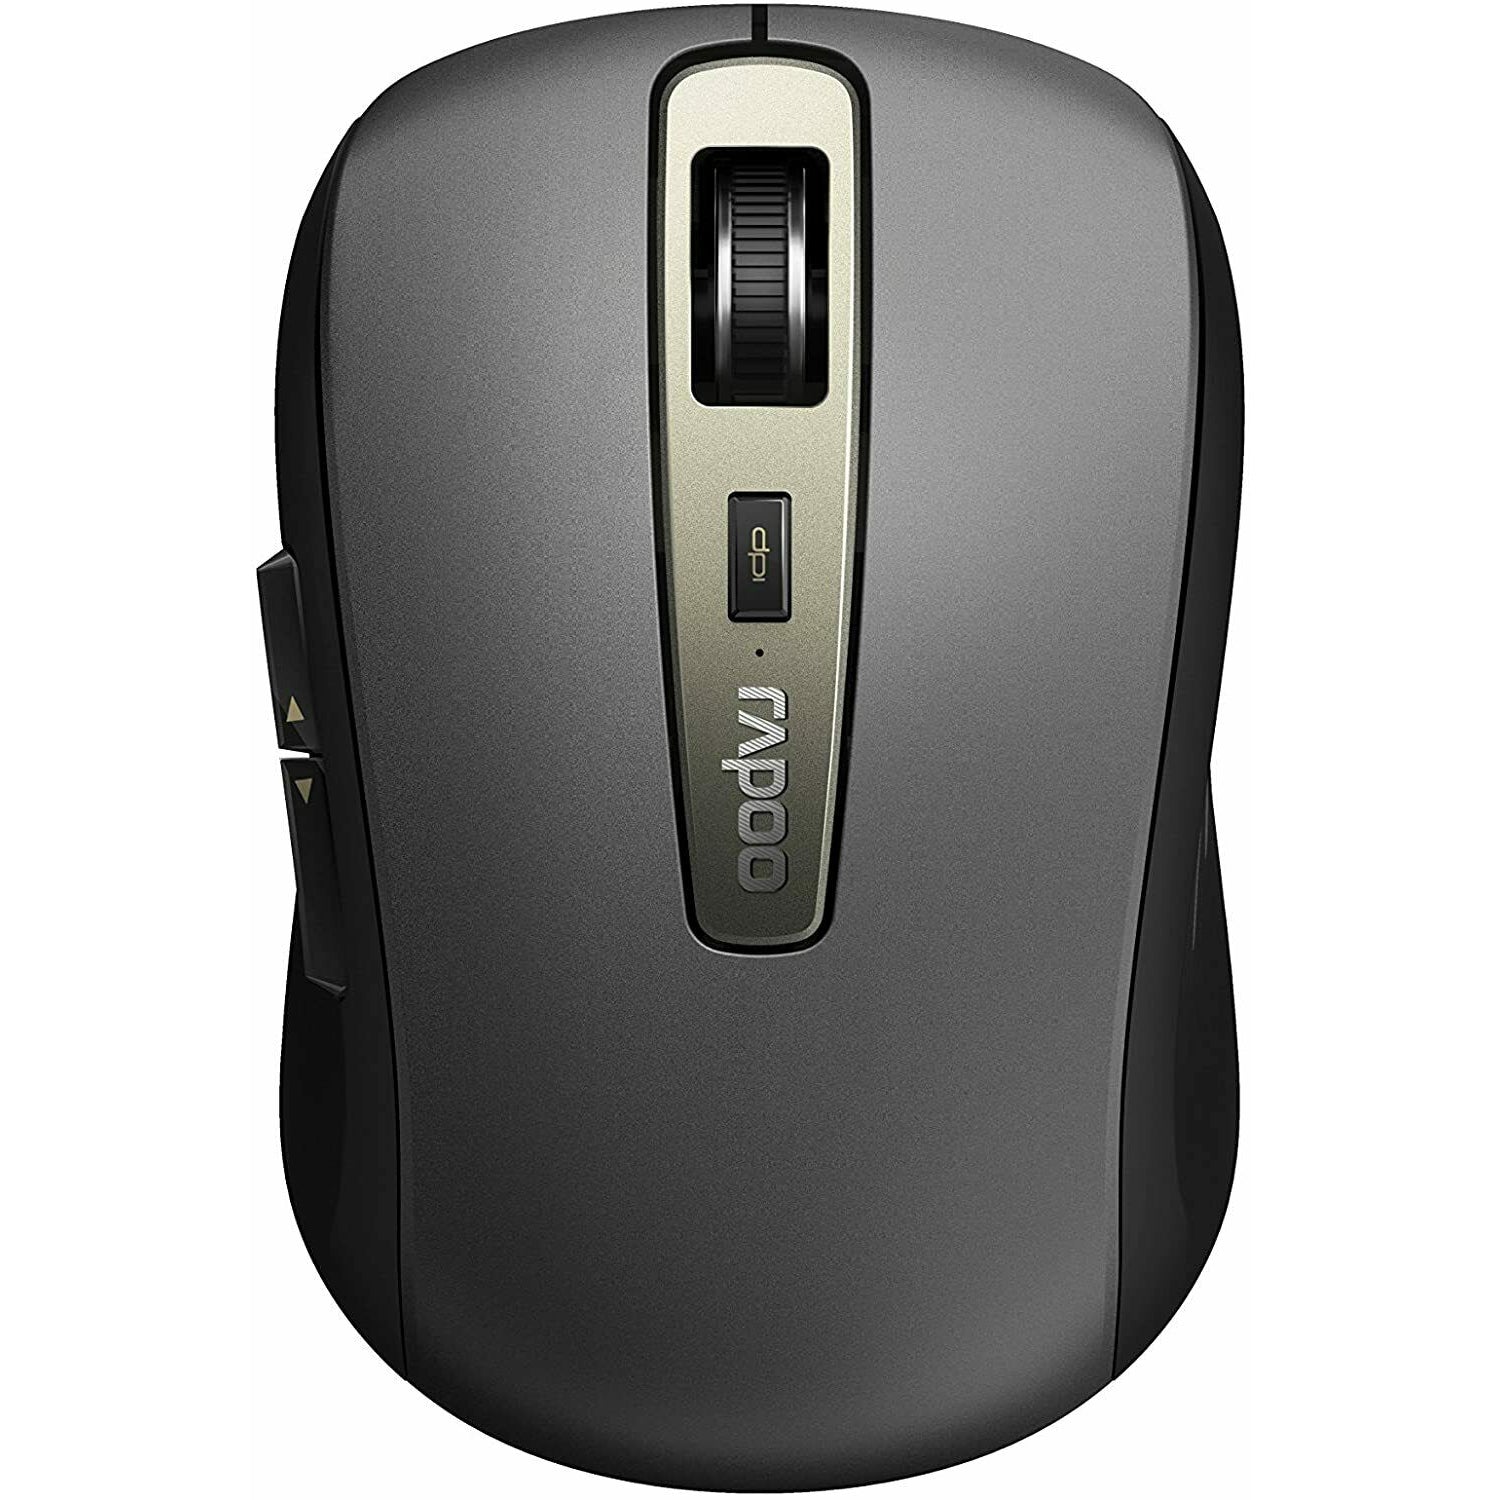 Rapoo MT350 Multi-mode Wireless Optical Mouse - Refurbished Excellent